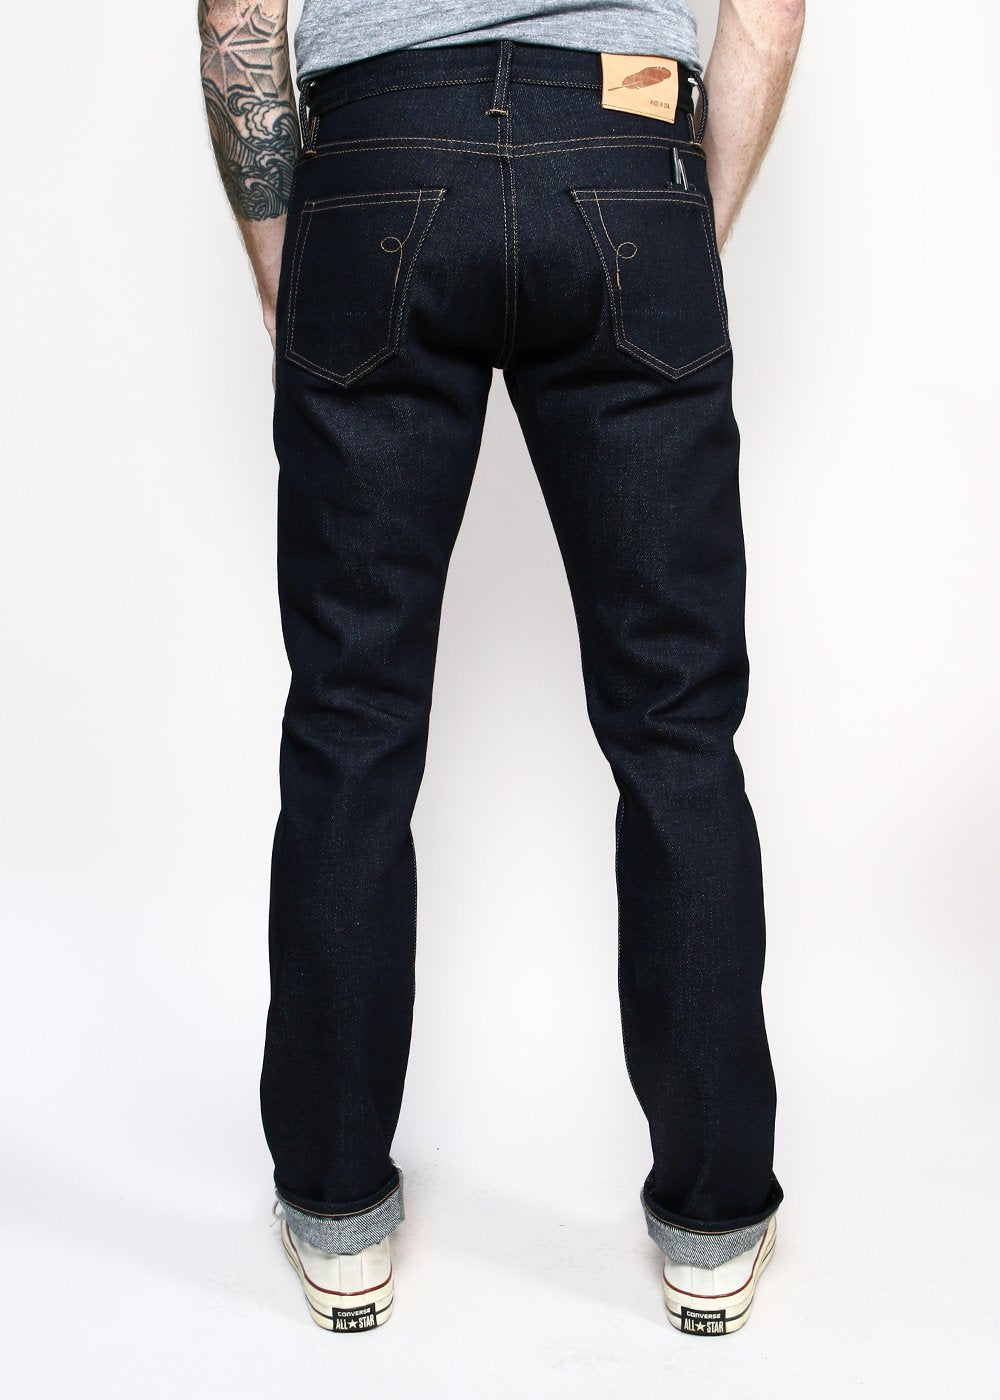 Rogue Territory 22oz Standard Issue Selvedge Mildblend